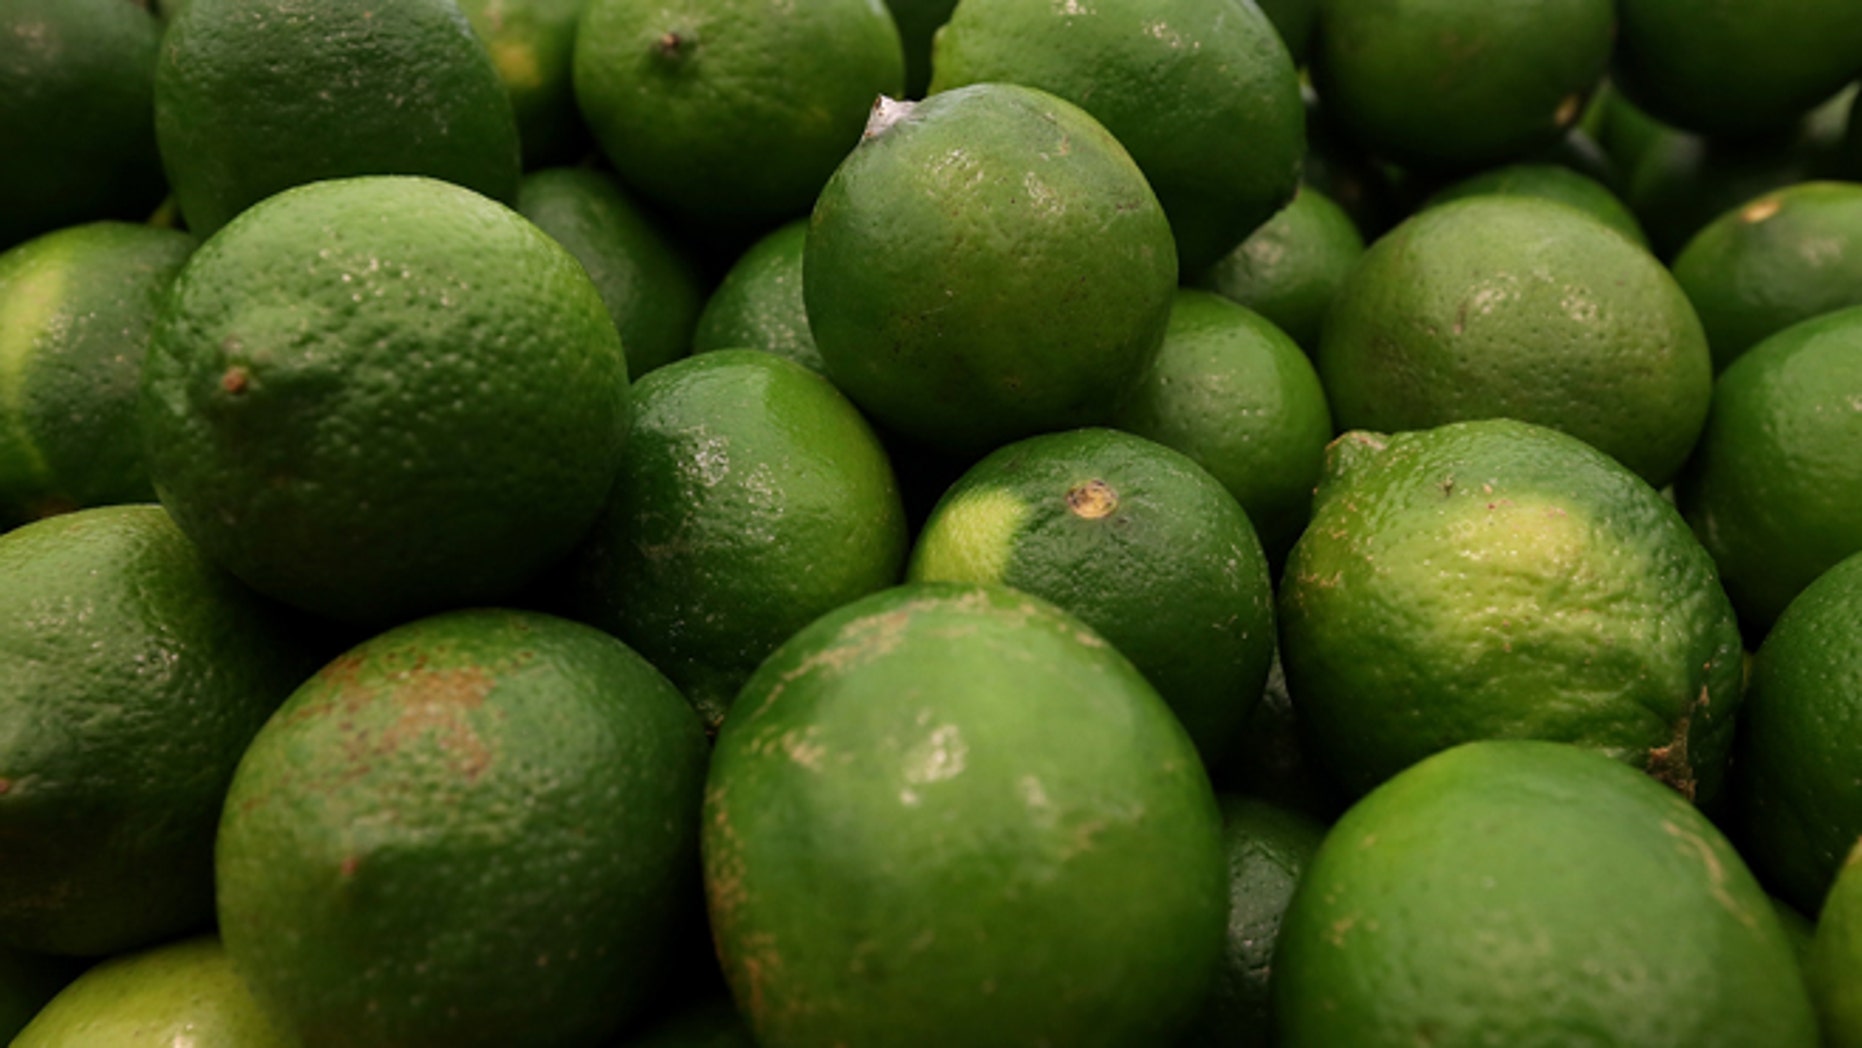 Airlines Dropping Limes As Prices Soar 